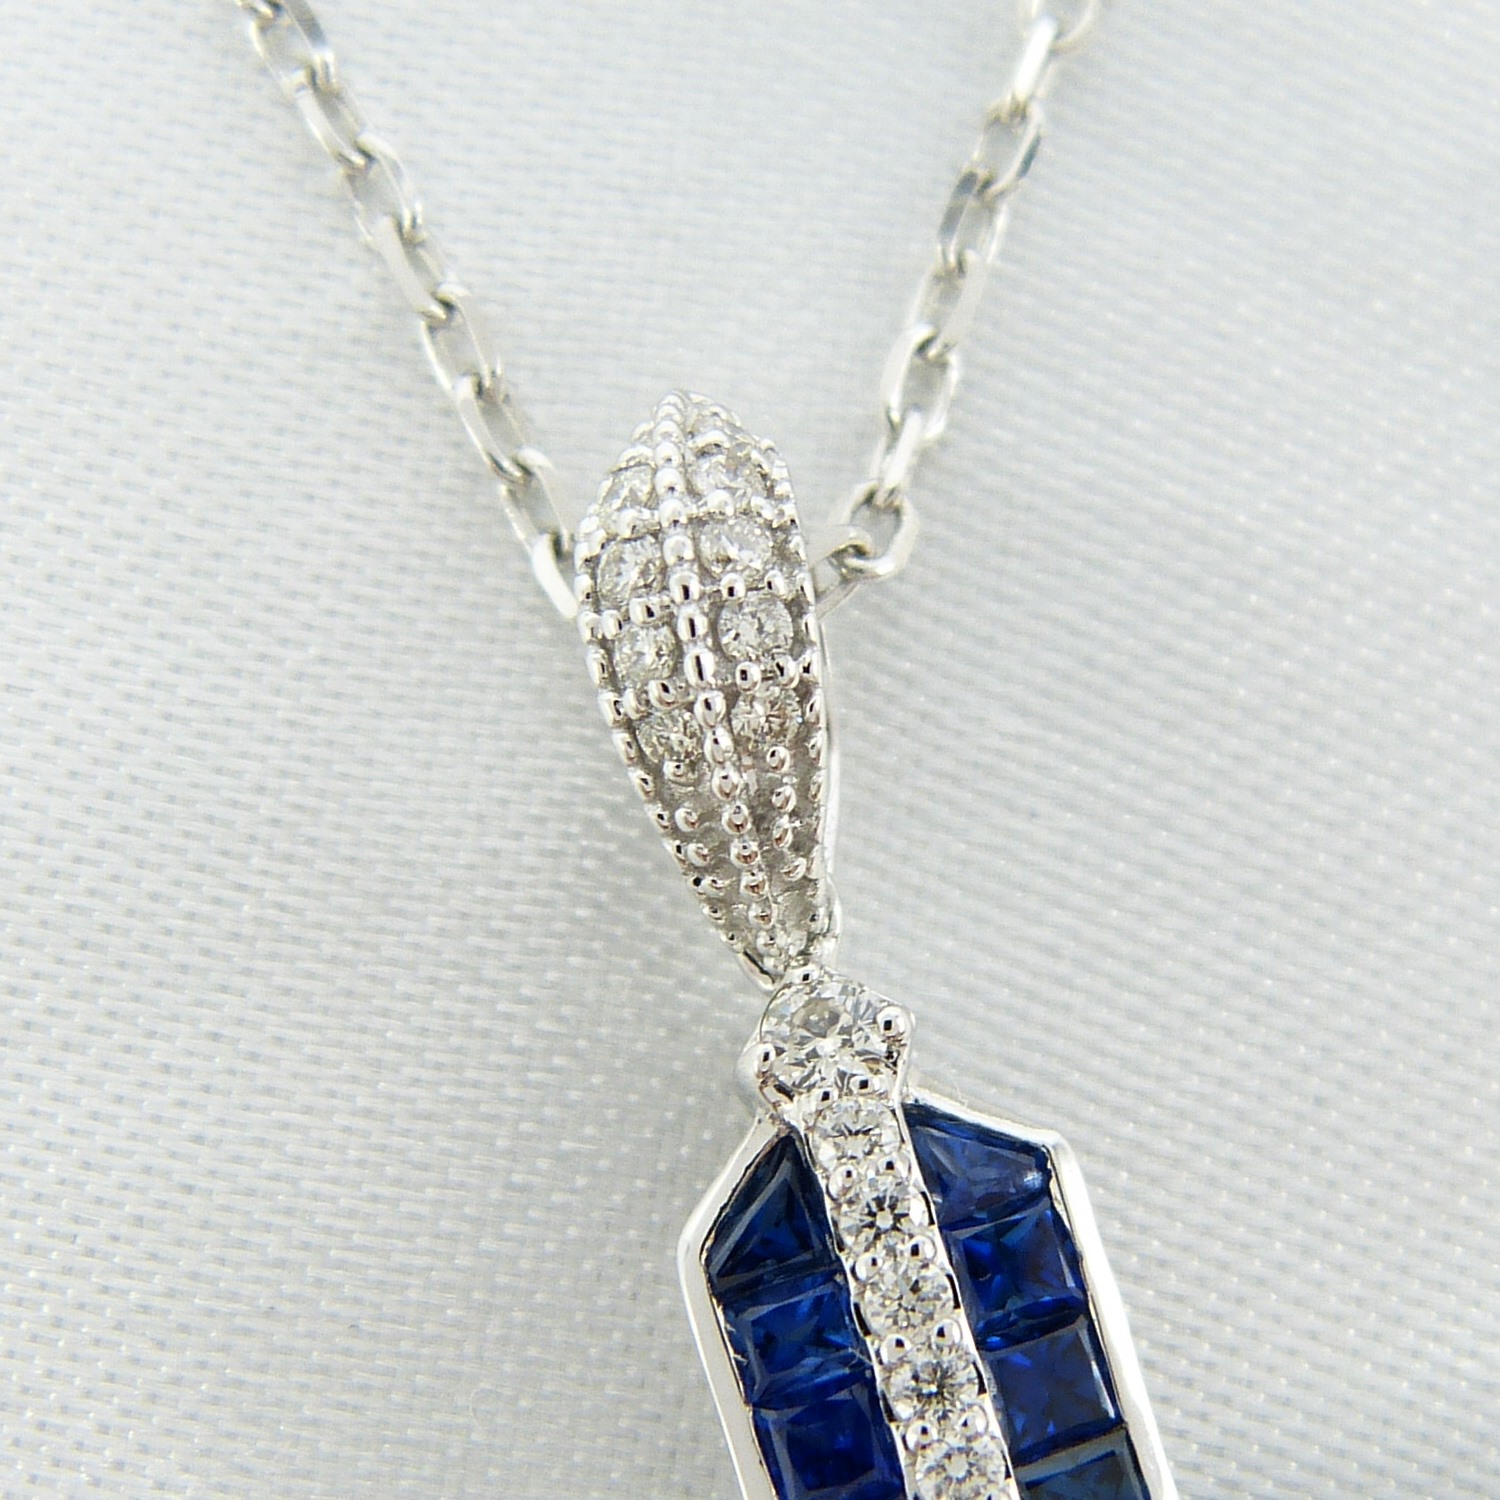 Impressive cross necklace set with natural sapphires and diamonds in 18ct white gold, boxed - Image 7 of 8